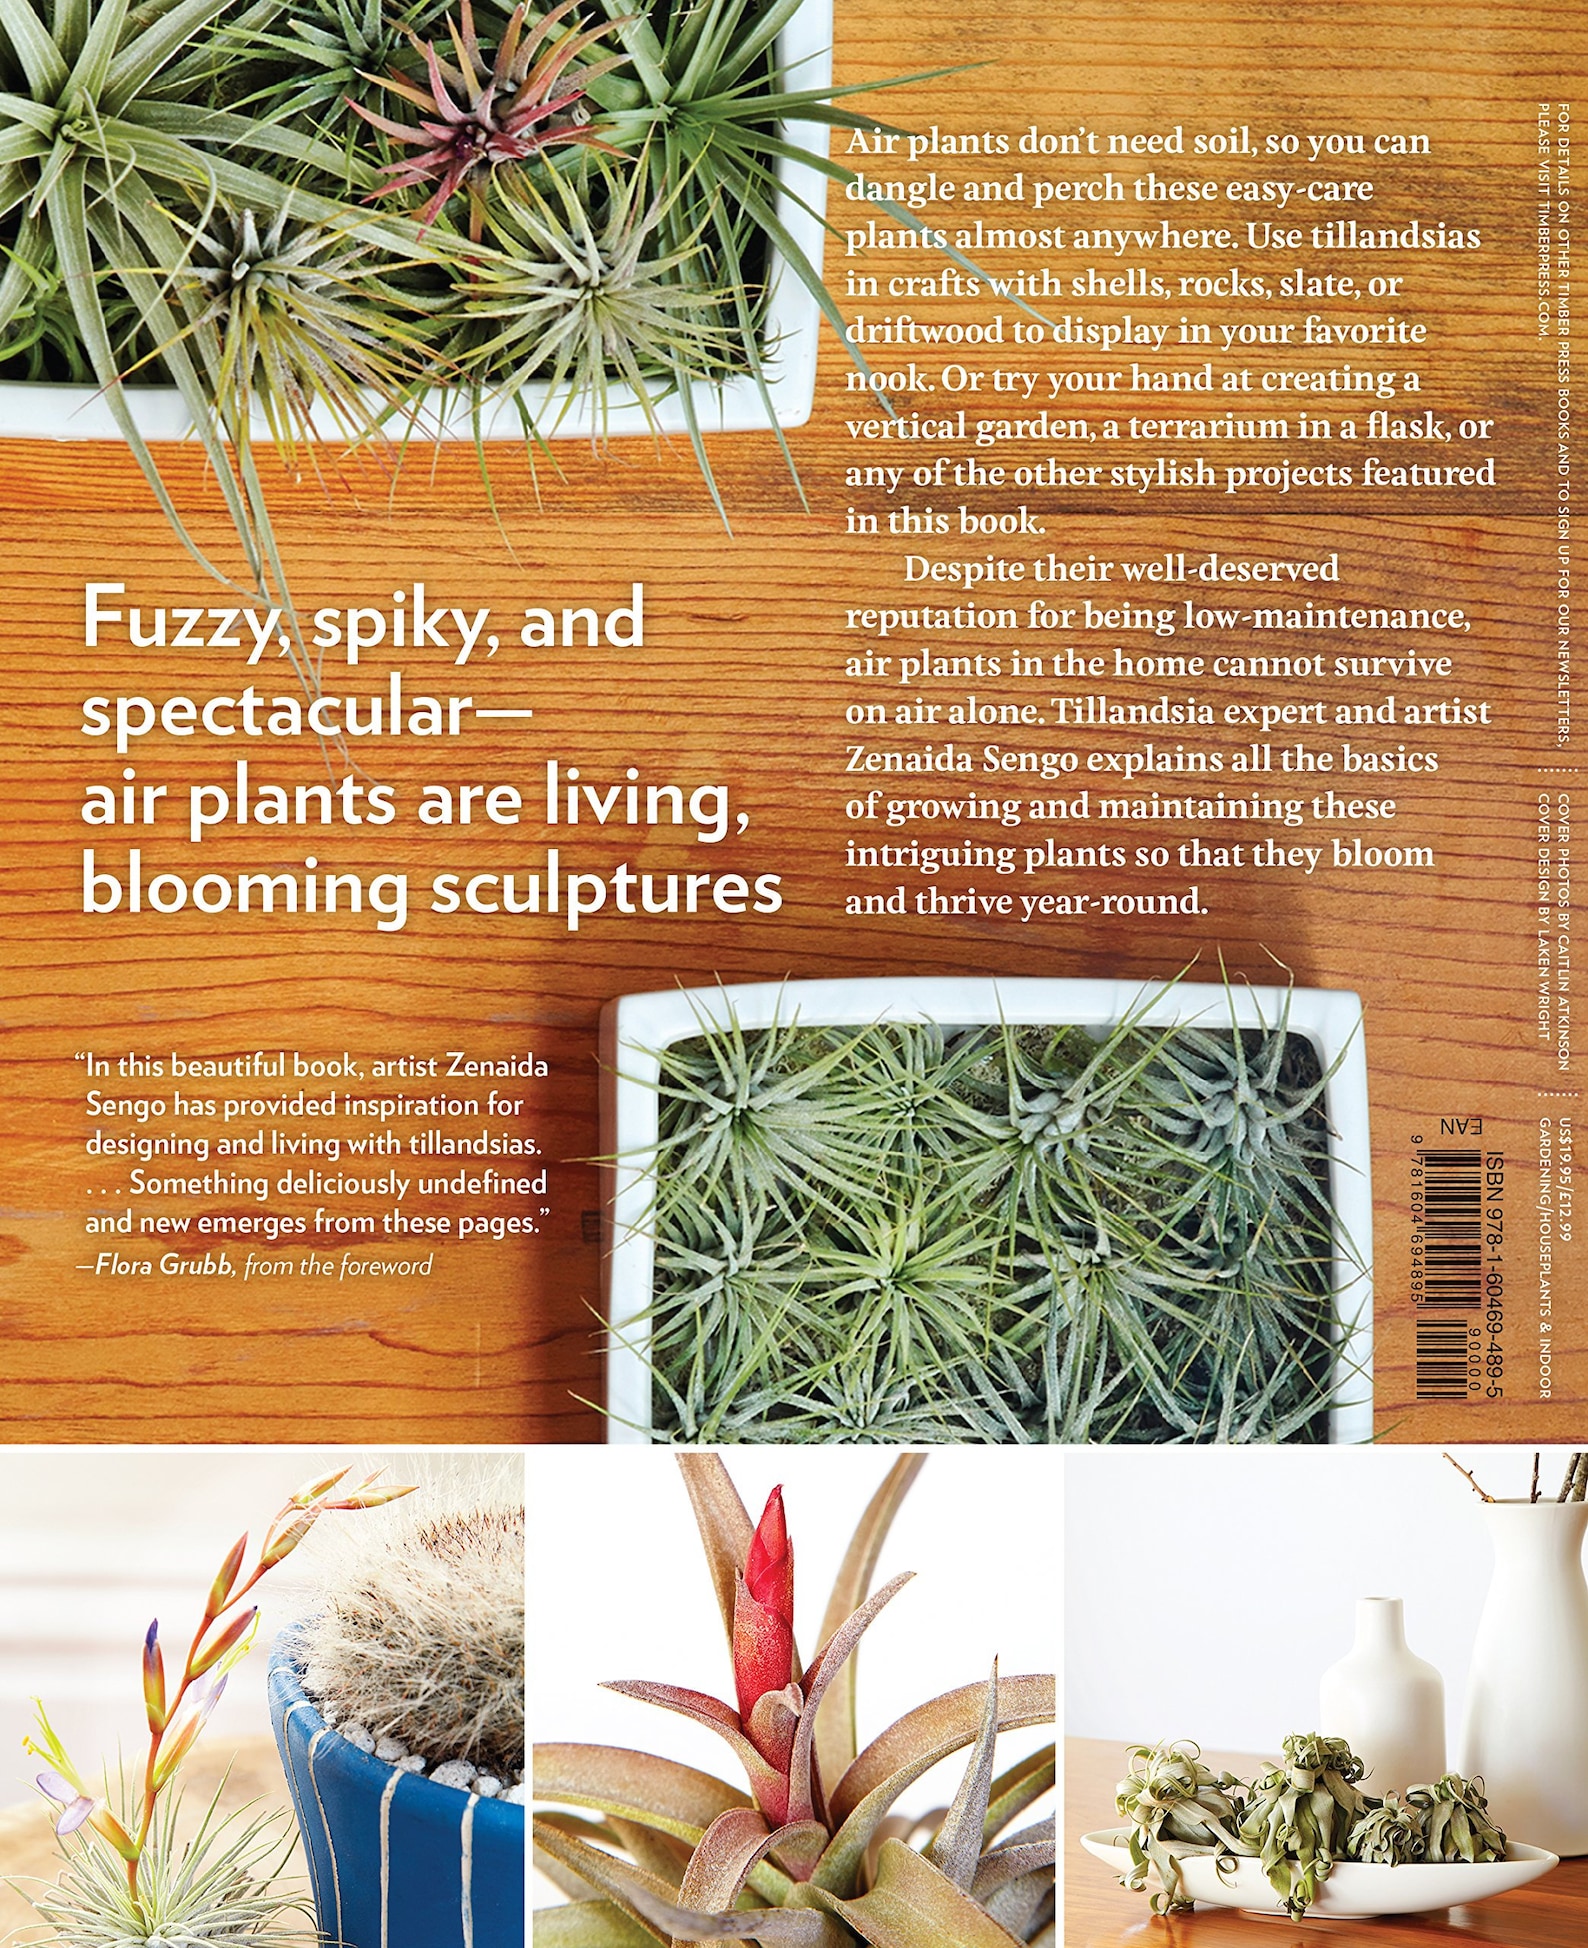 Book: Air Plants The Curious World of Tillandsia | Etsy